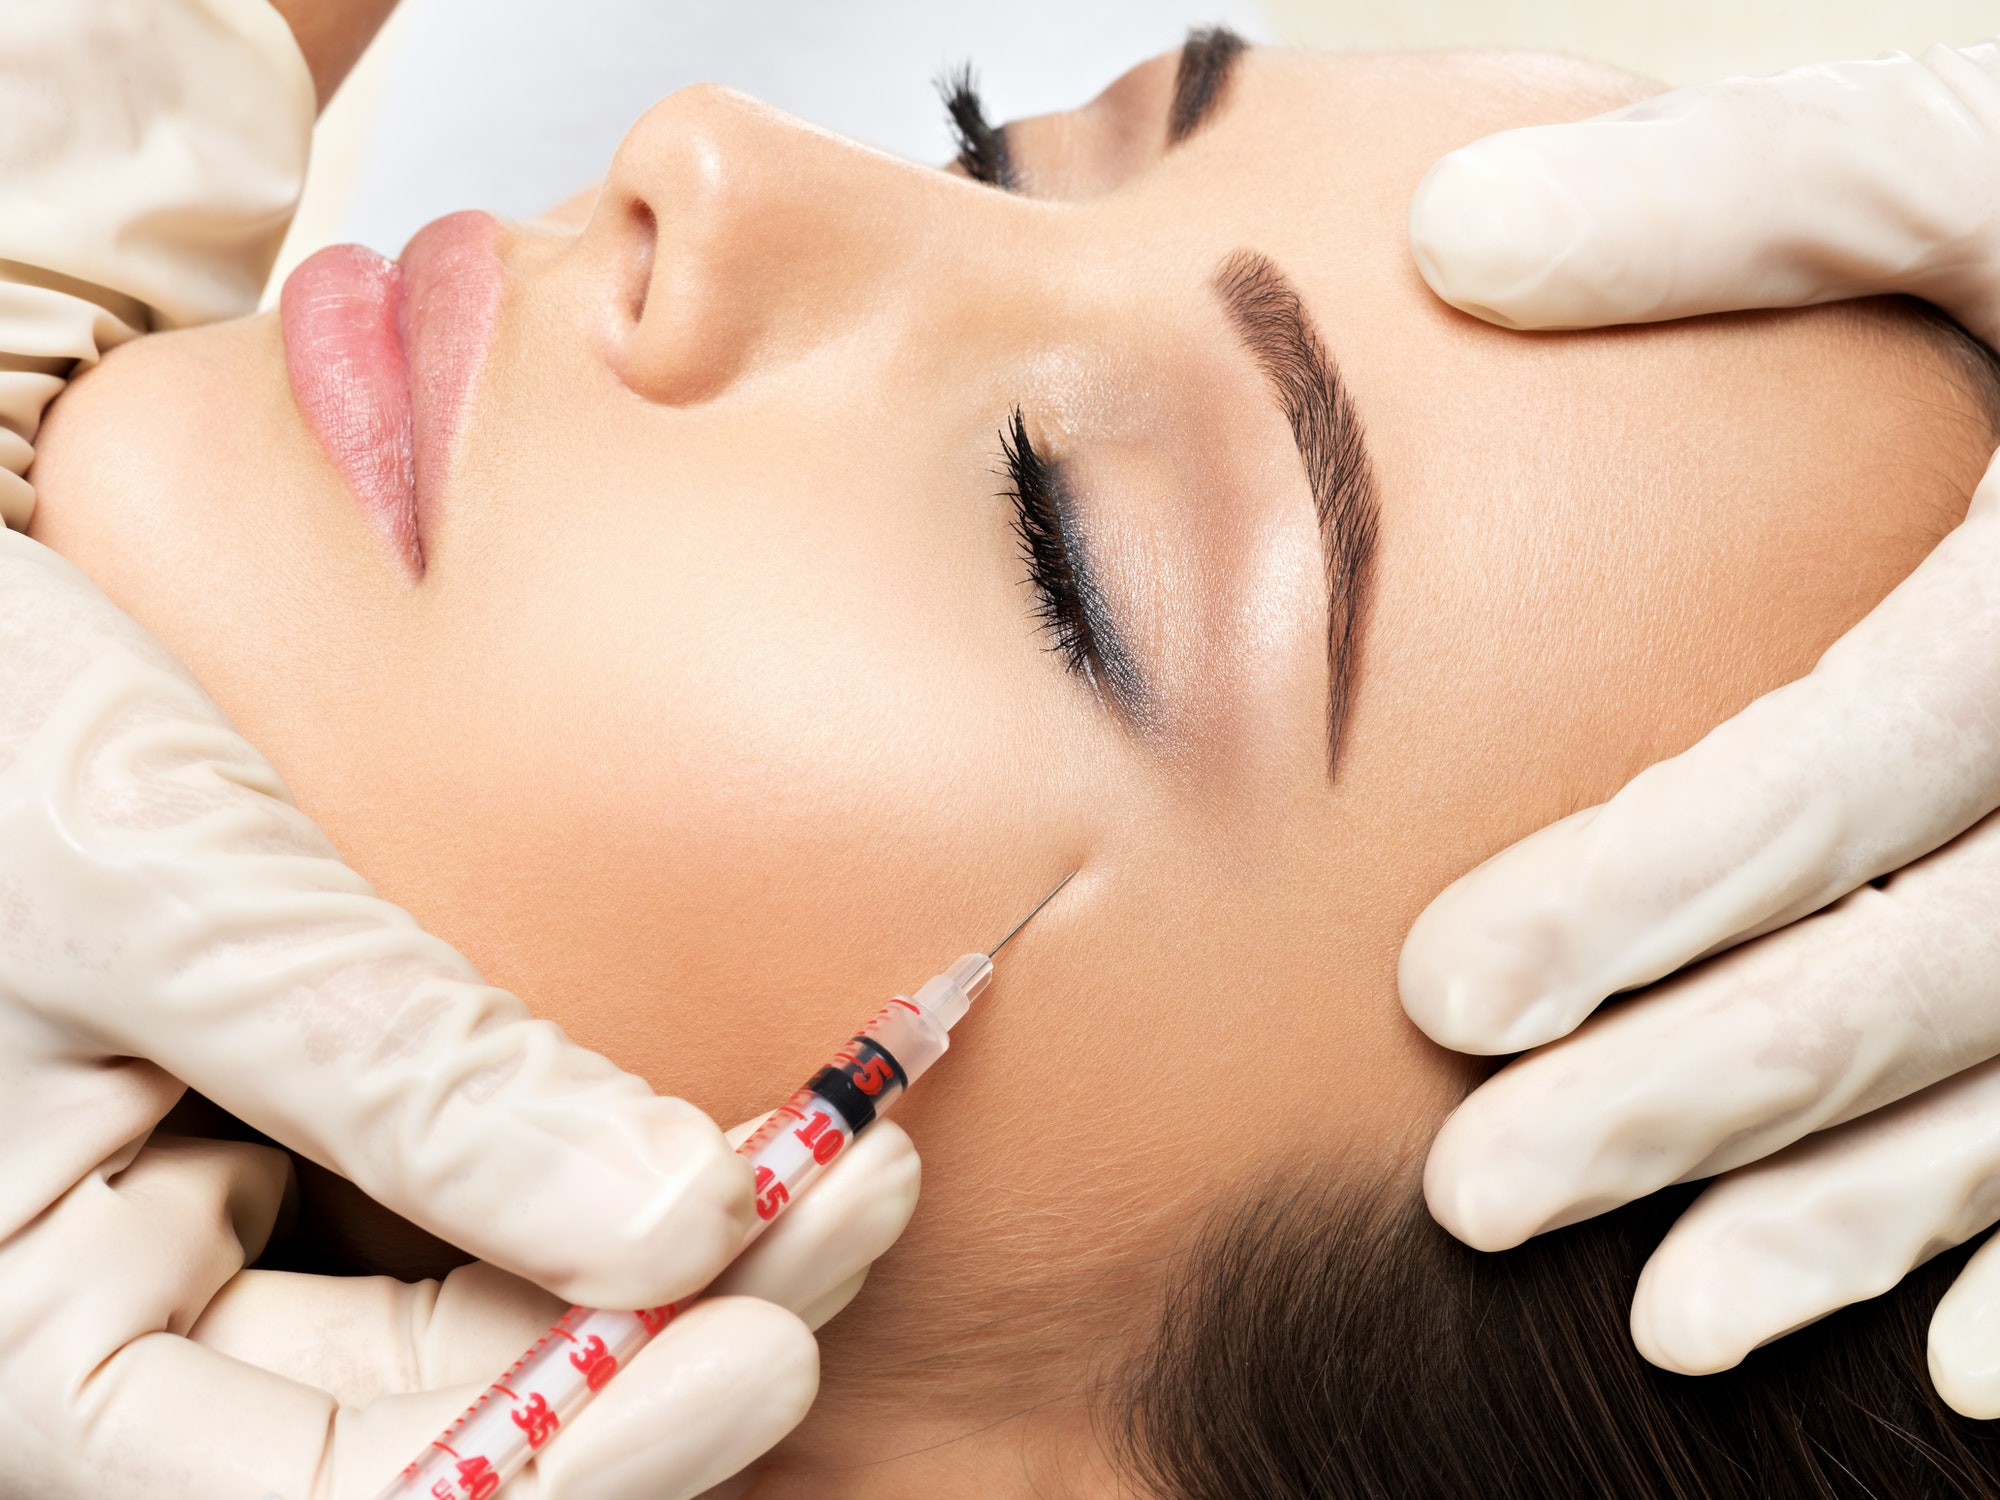 Woman getting cosmetic injection of botox near eyes